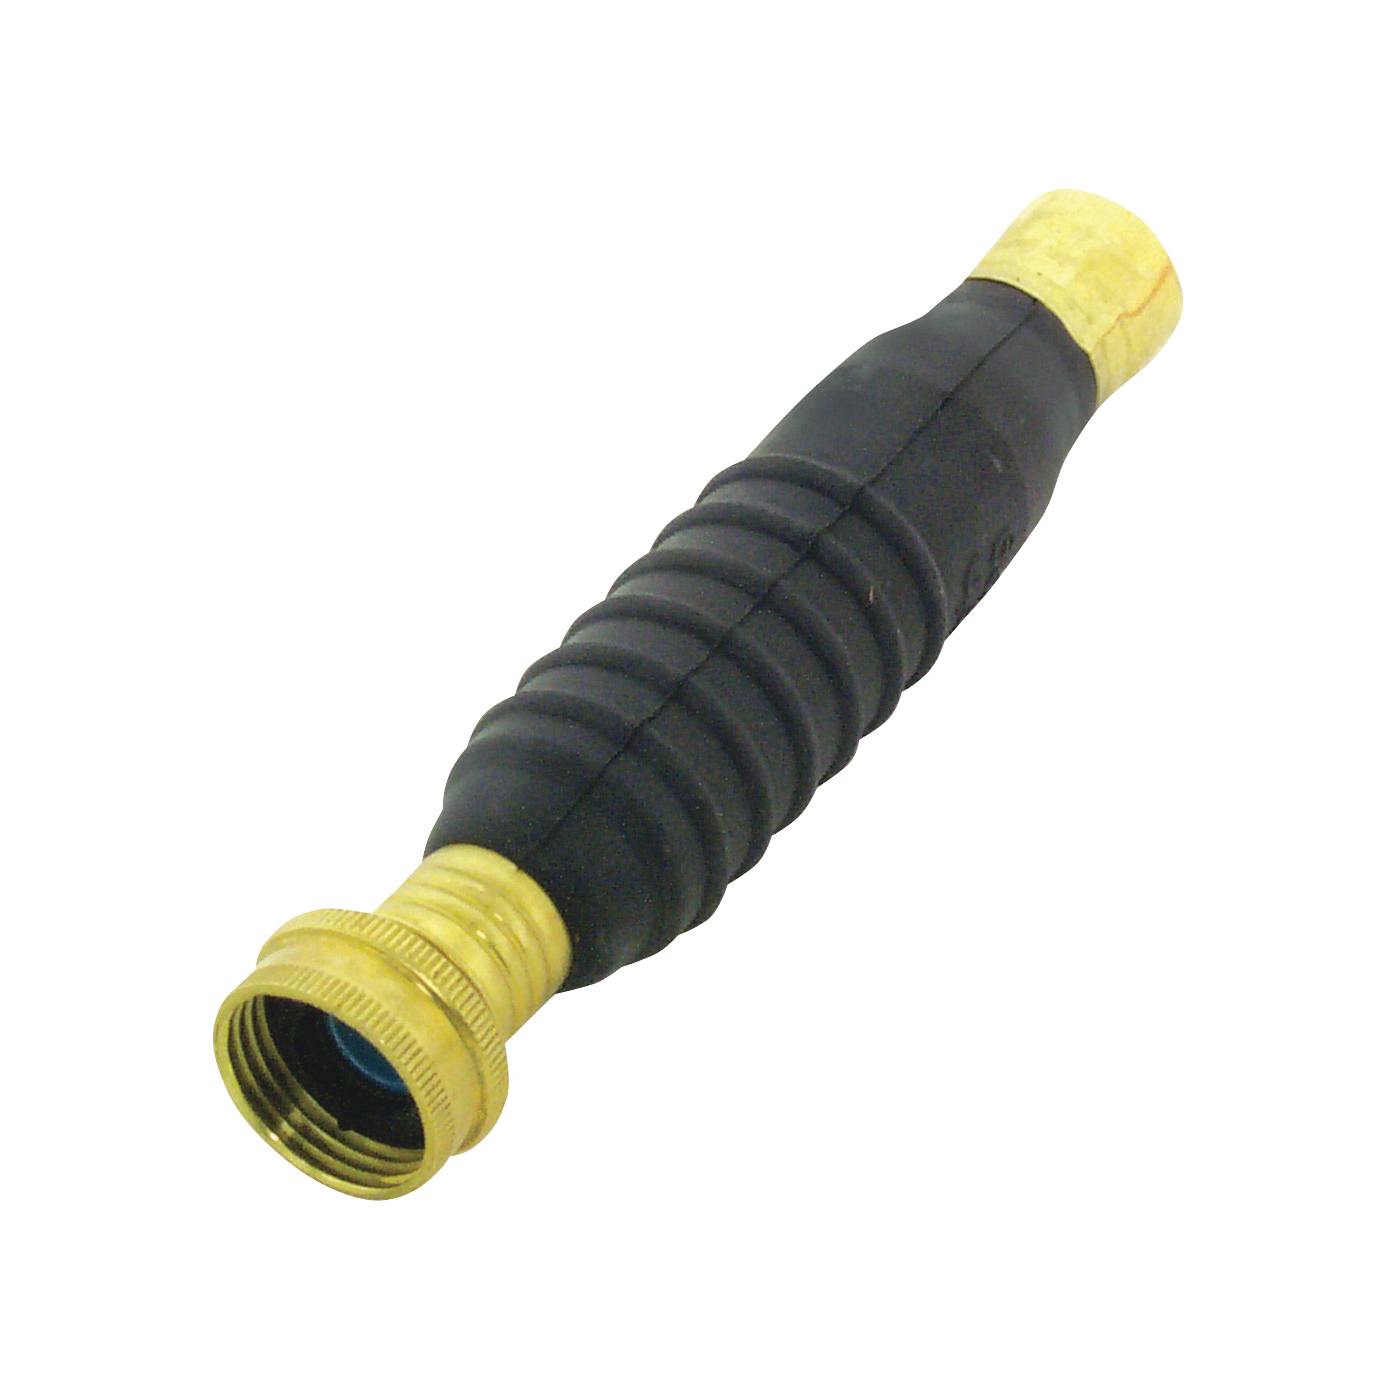 186 Drain Opener/Cleaner, 50 to 80 psi Pressure, 1-1/2 to 3 in Drain